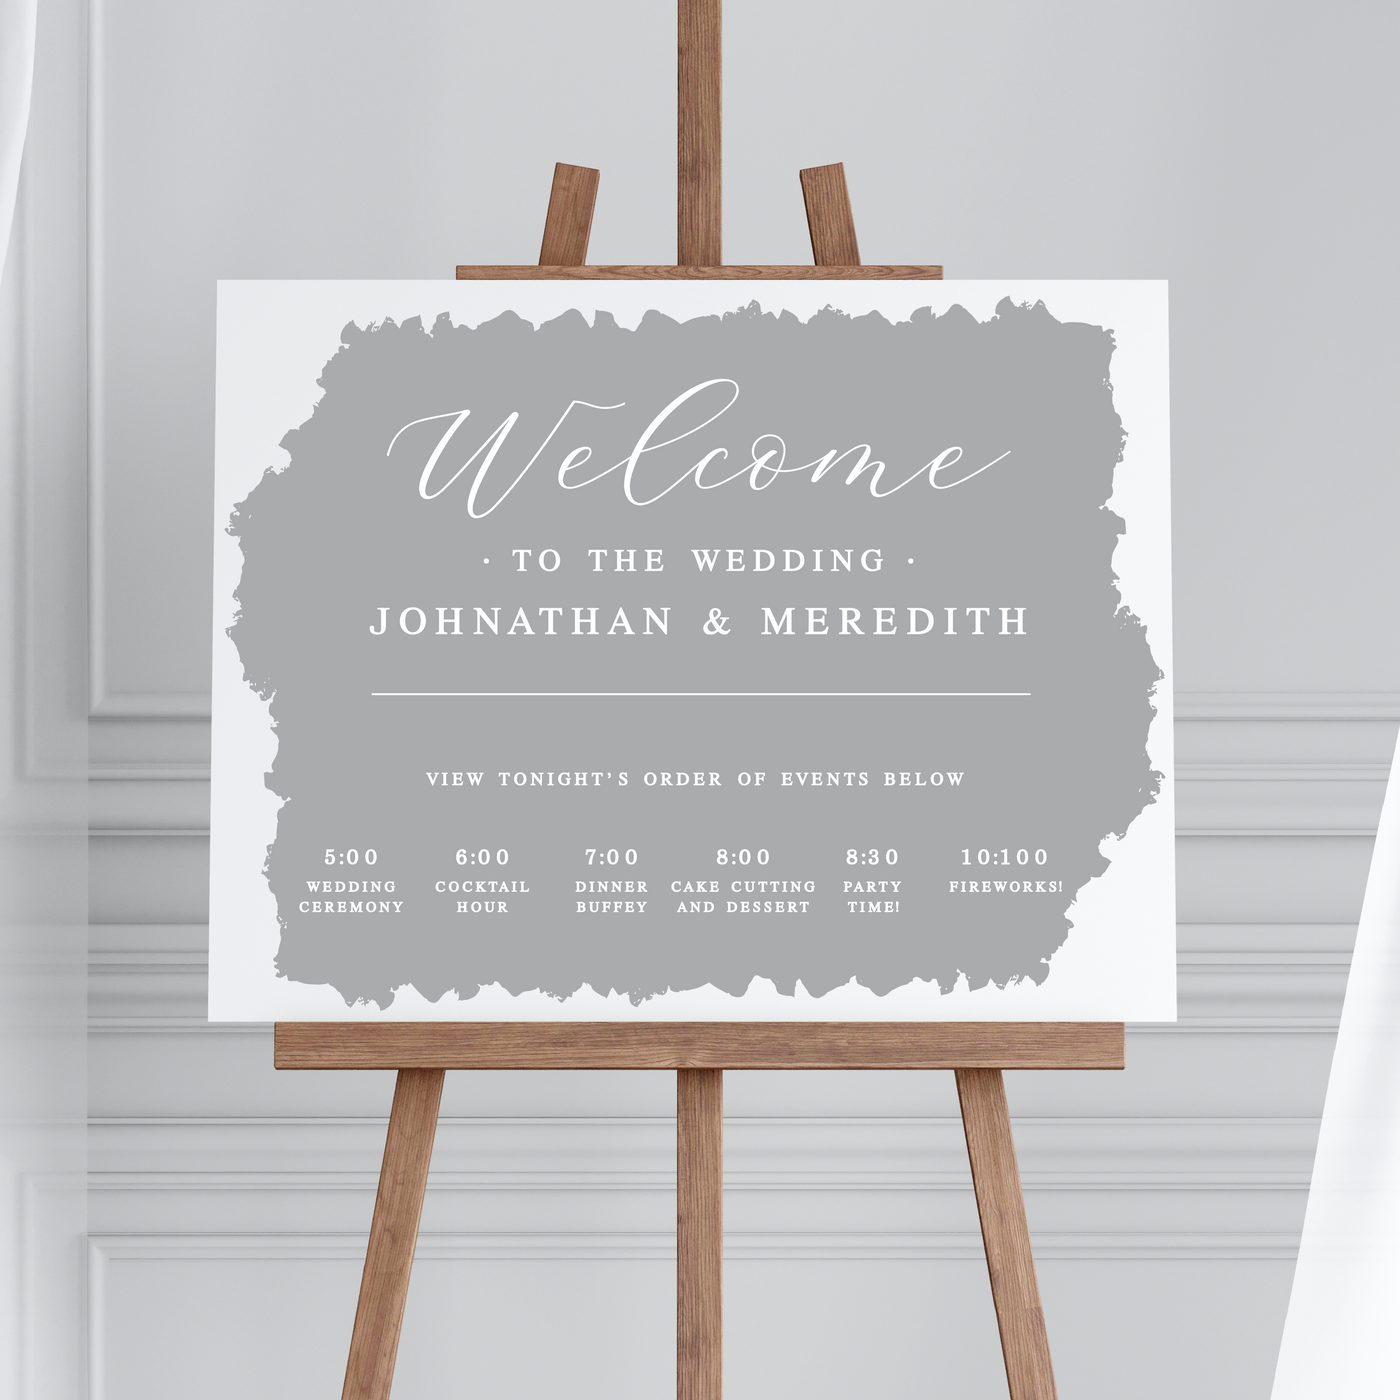 Painted-Effect Order of Events Wedding Welcome Sign